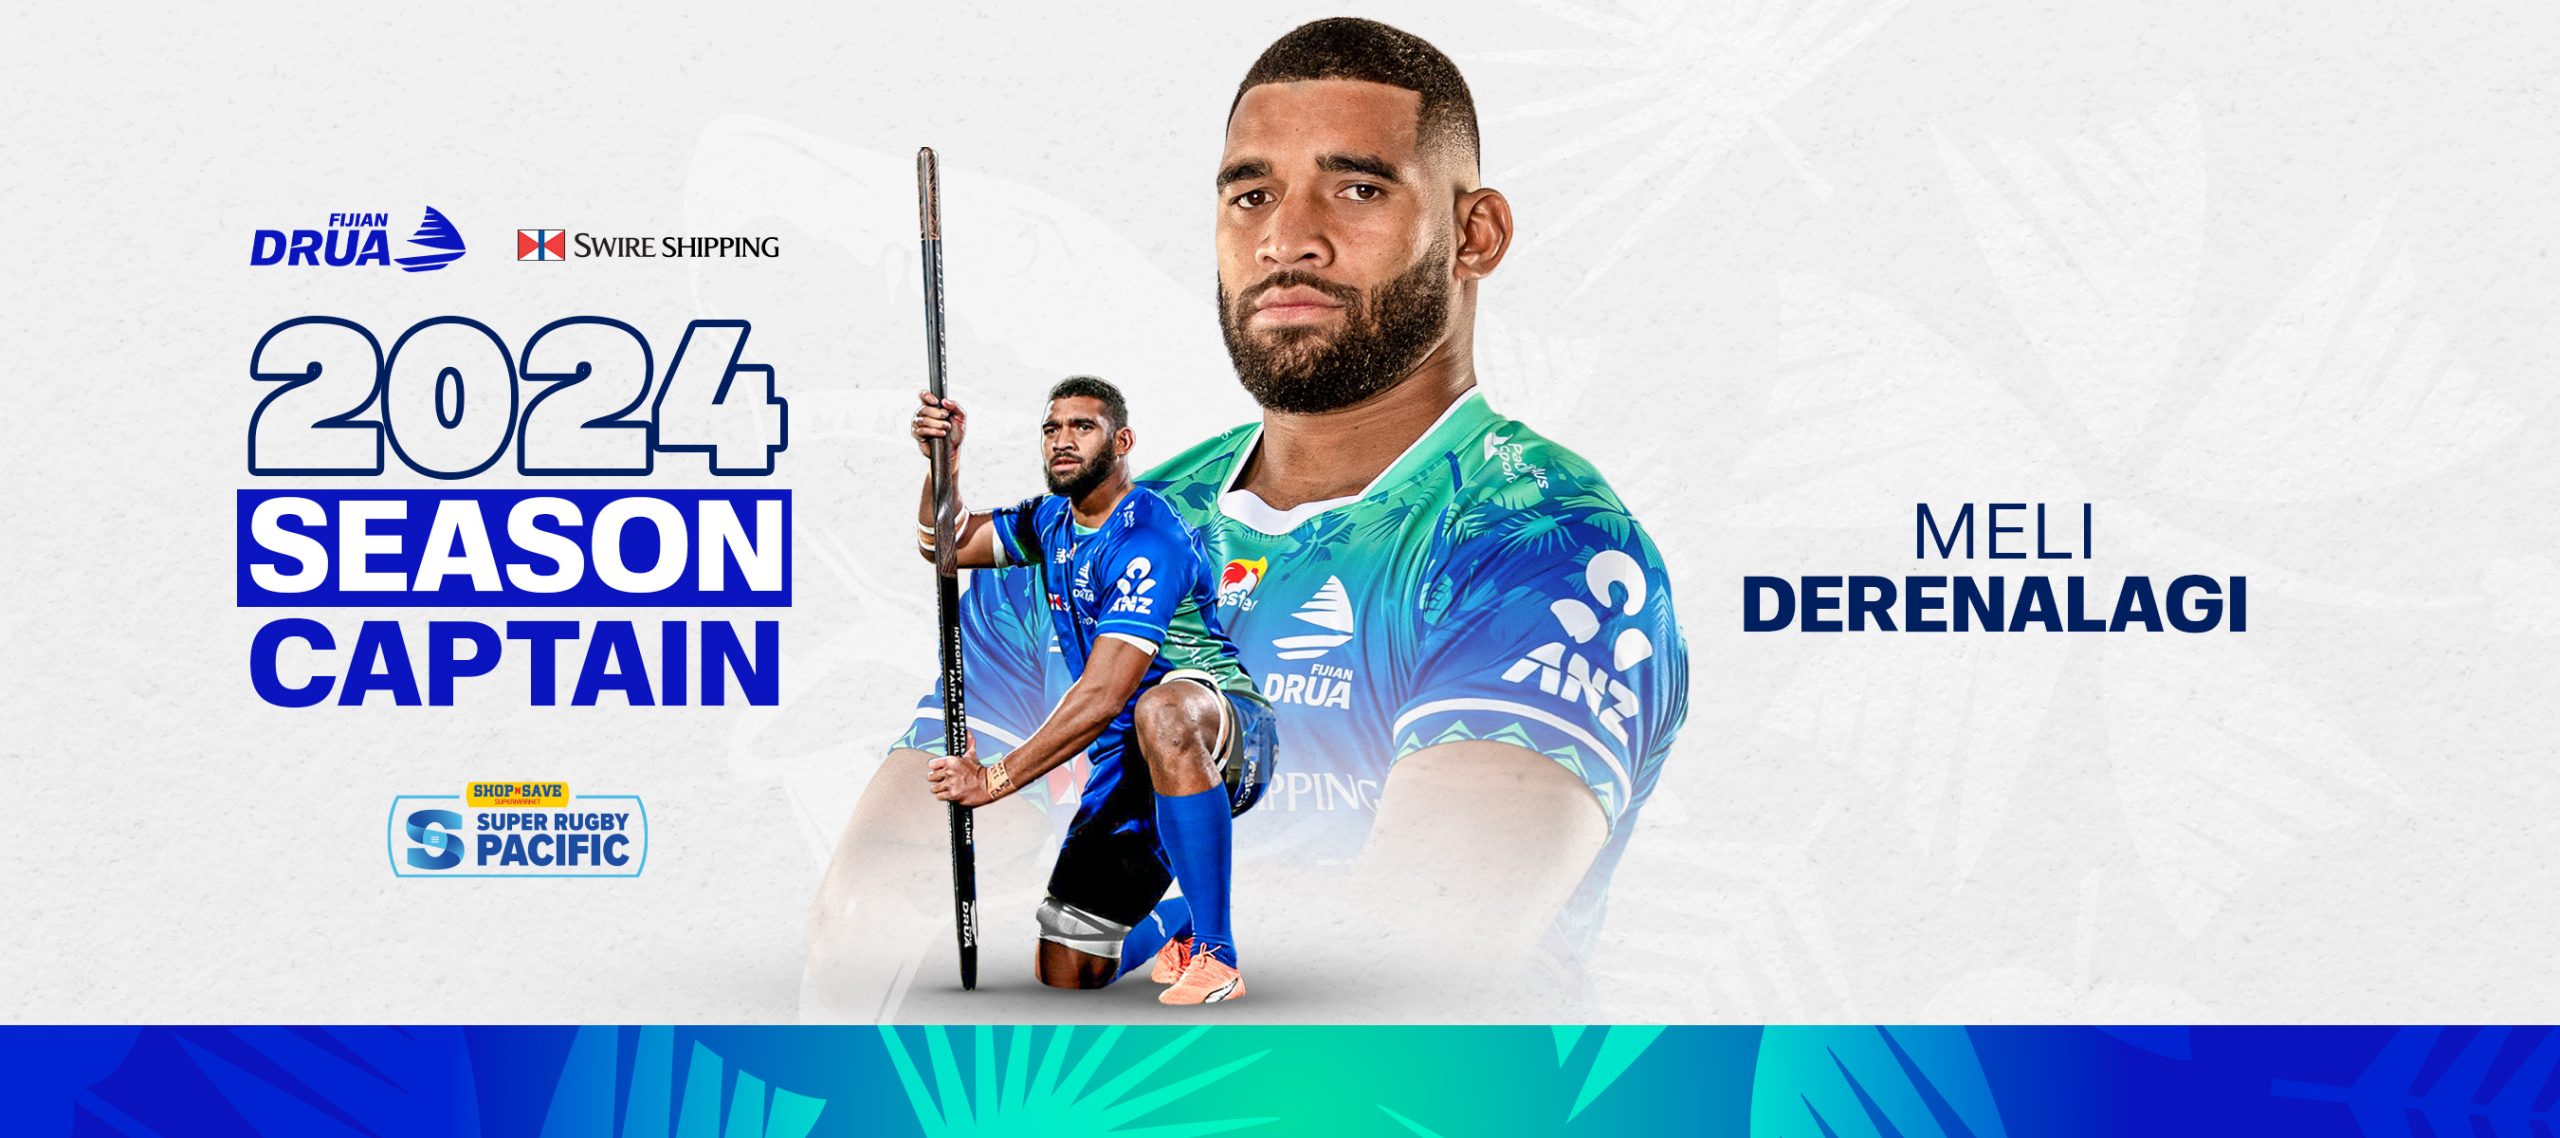 Derenalagi - Fijian Drua captain for 2024 Super Rugby Pacific campaign ...